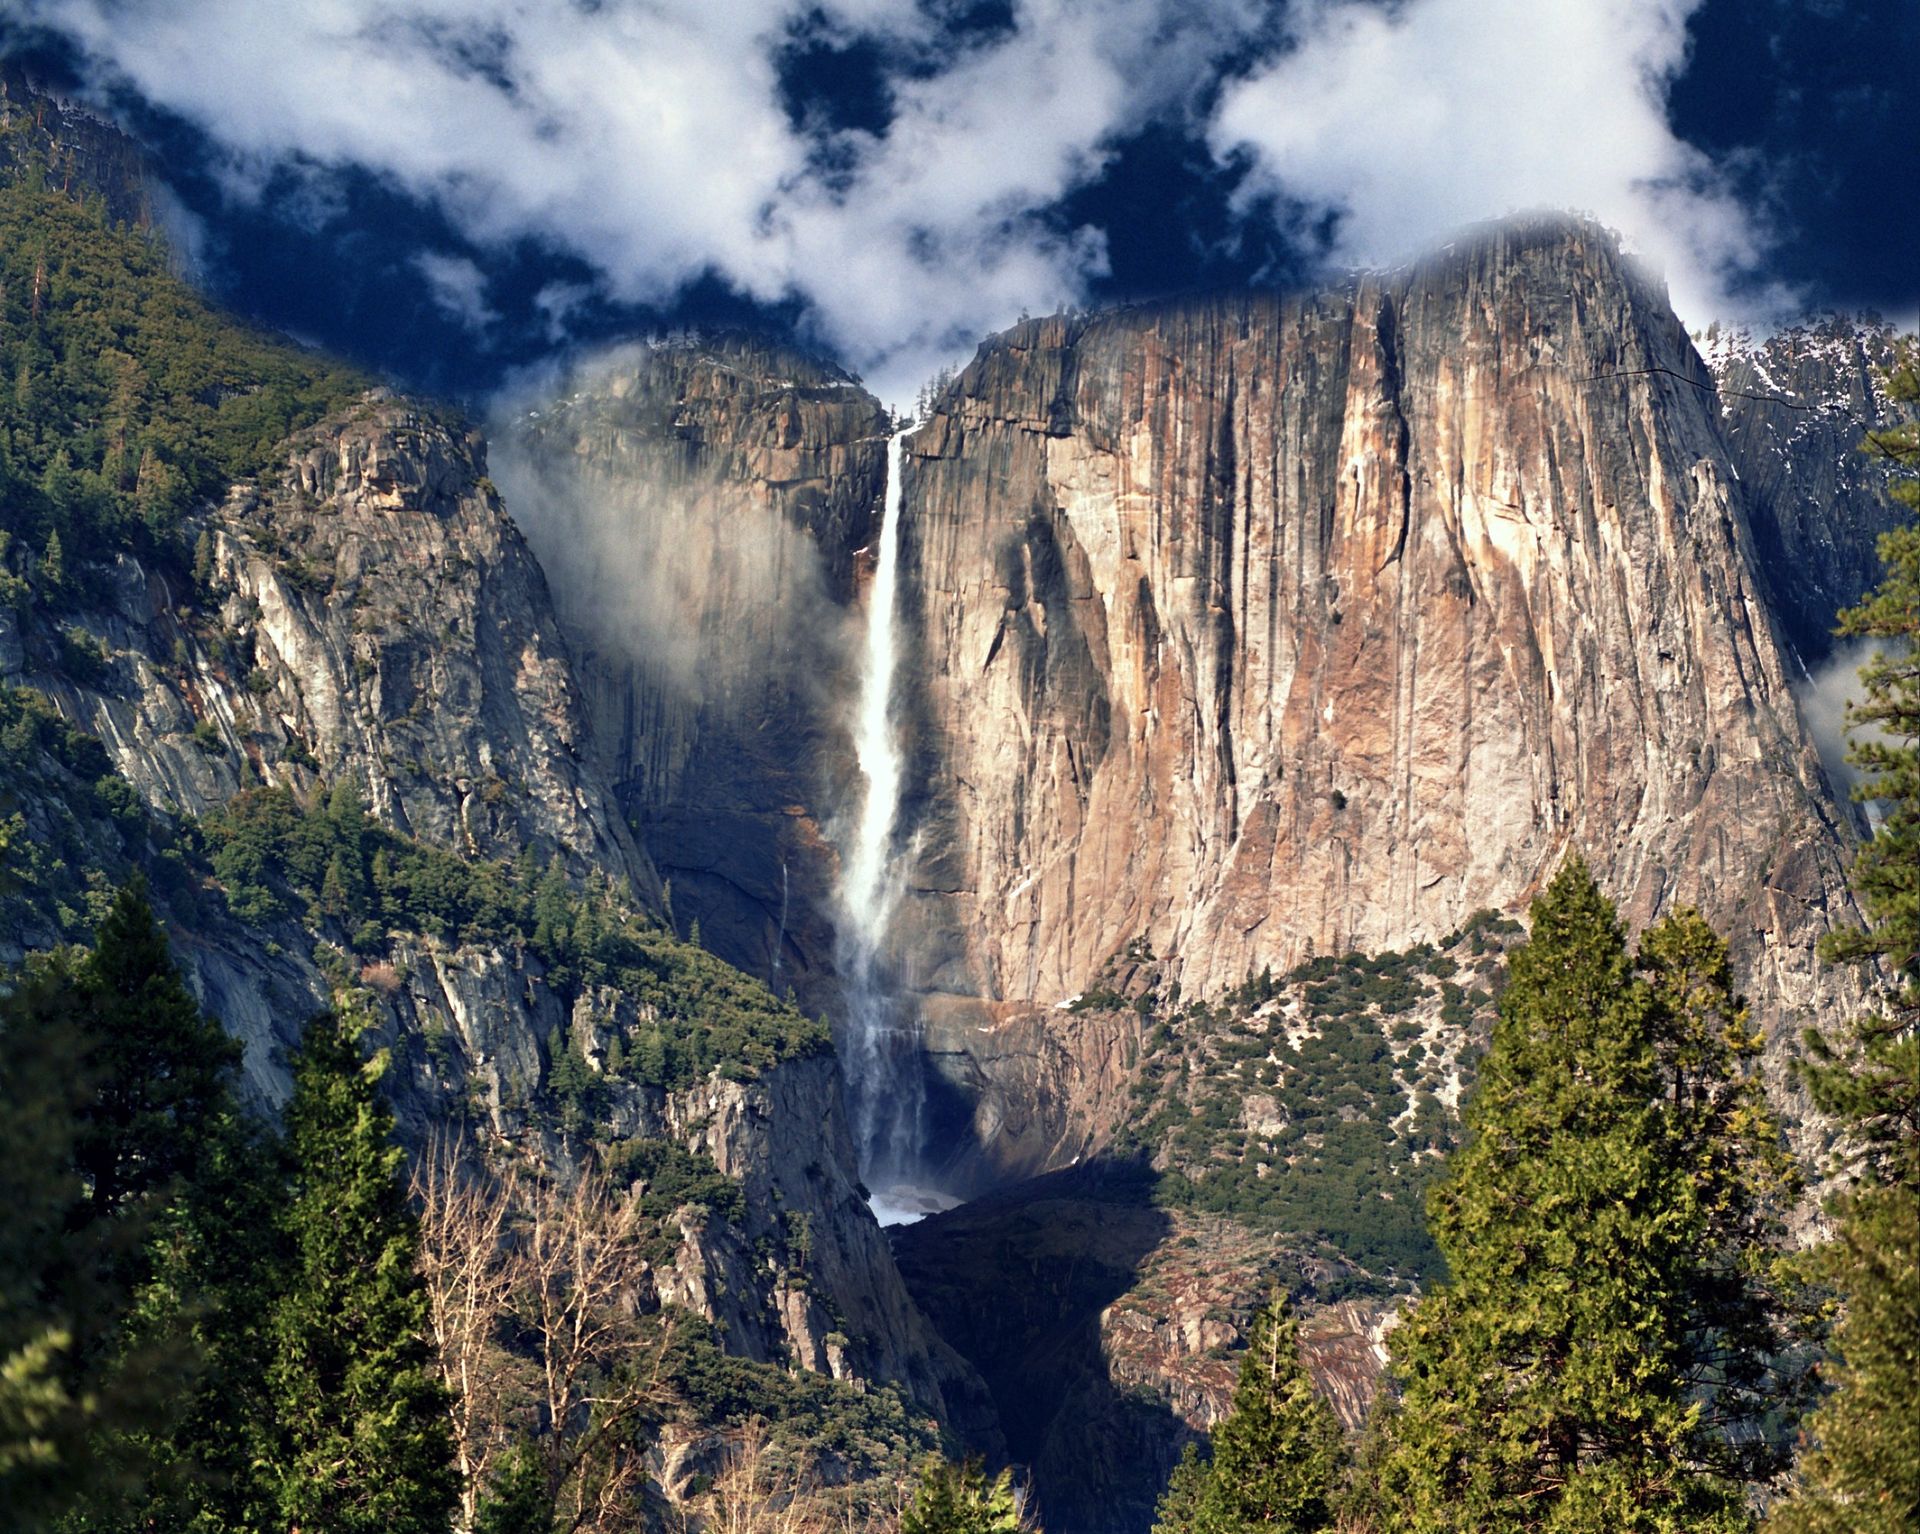 A waterfall over a cliff in Yosemite National Park.